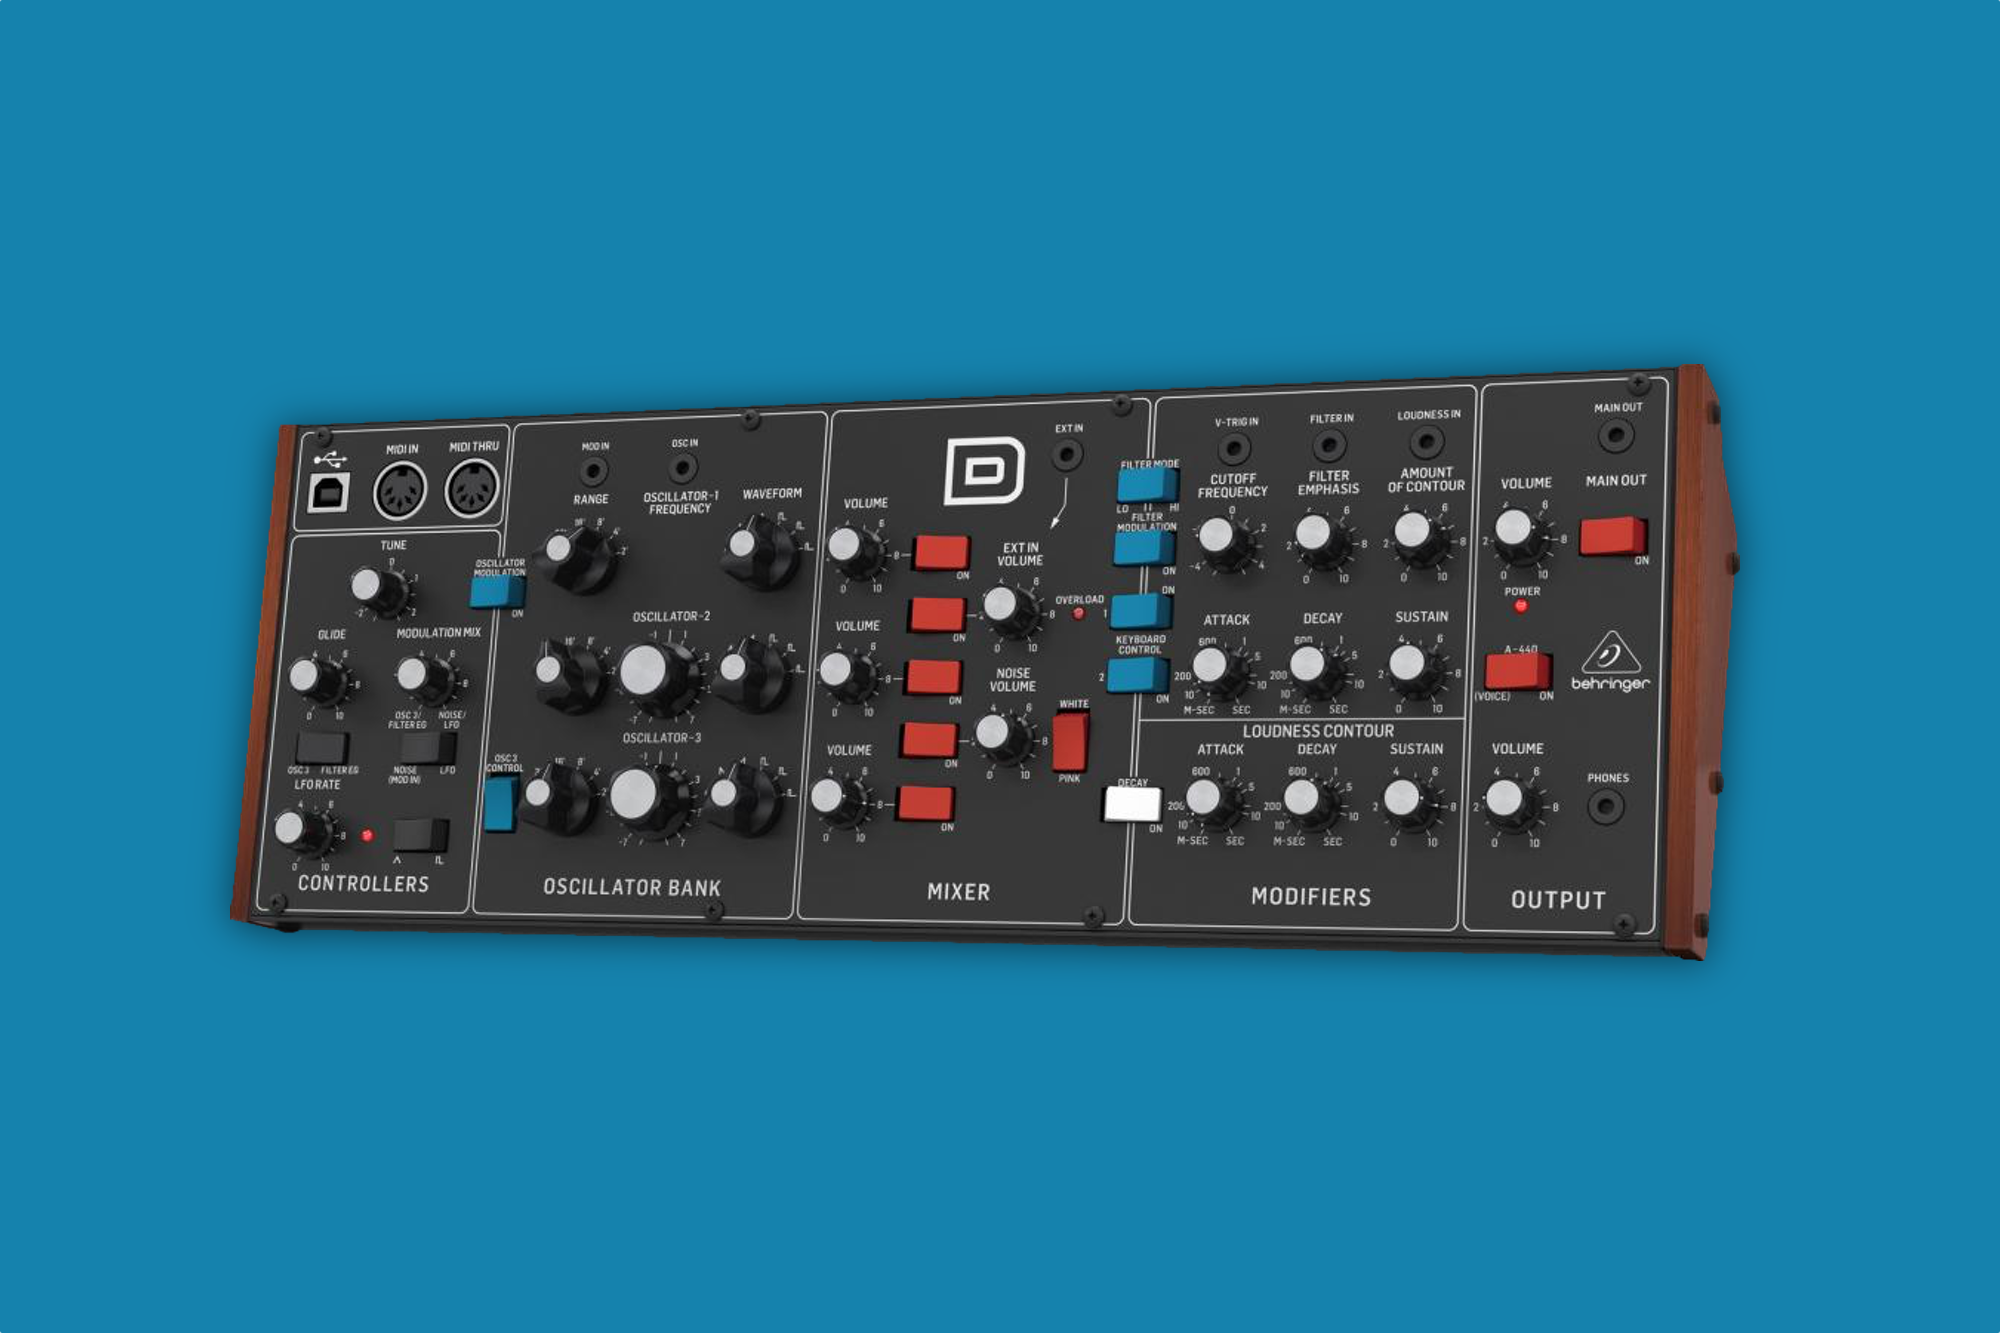 Behringer shows off its $400 Minimoog clone for Eurorack